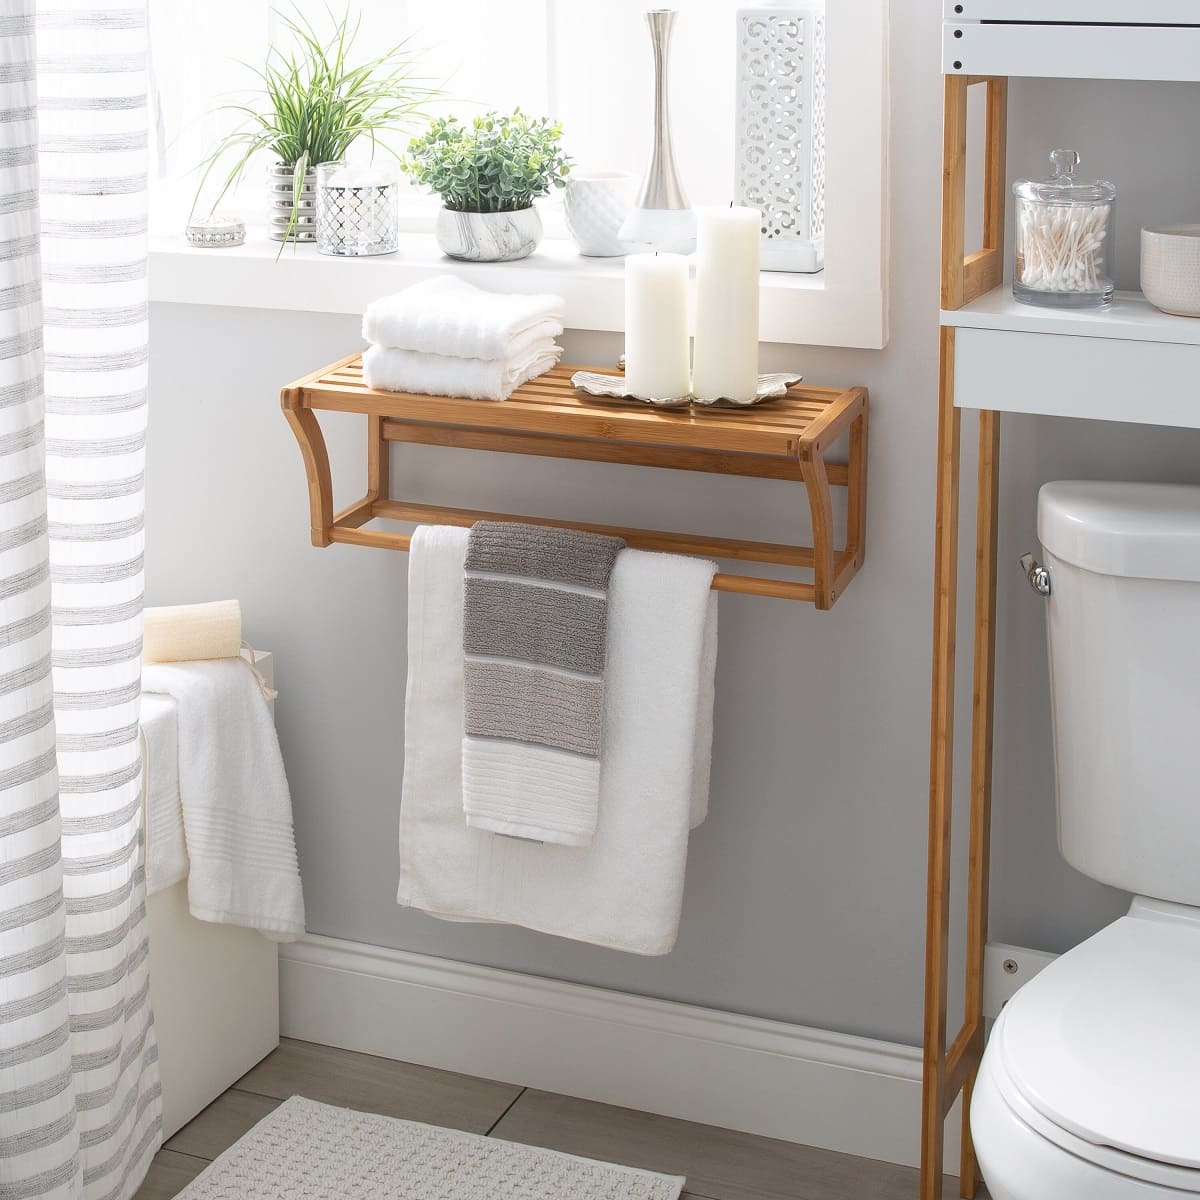 Where To Place Towel Bar In Small Bathroom